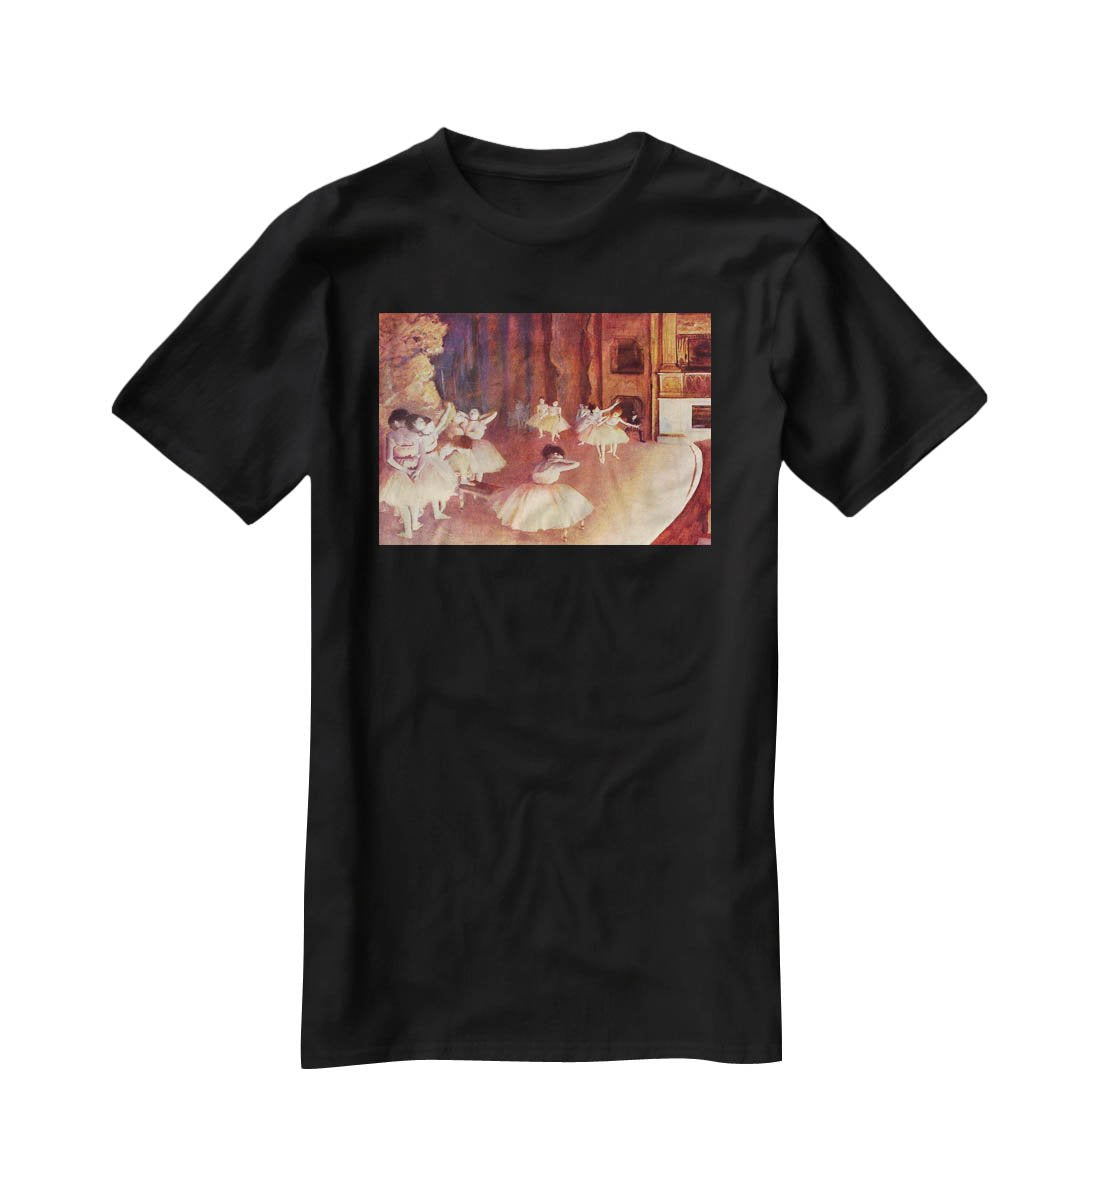 Dress rehearsal of the ballet on the stage by Degas T-Shirt - Canvas Art Rocks - 1